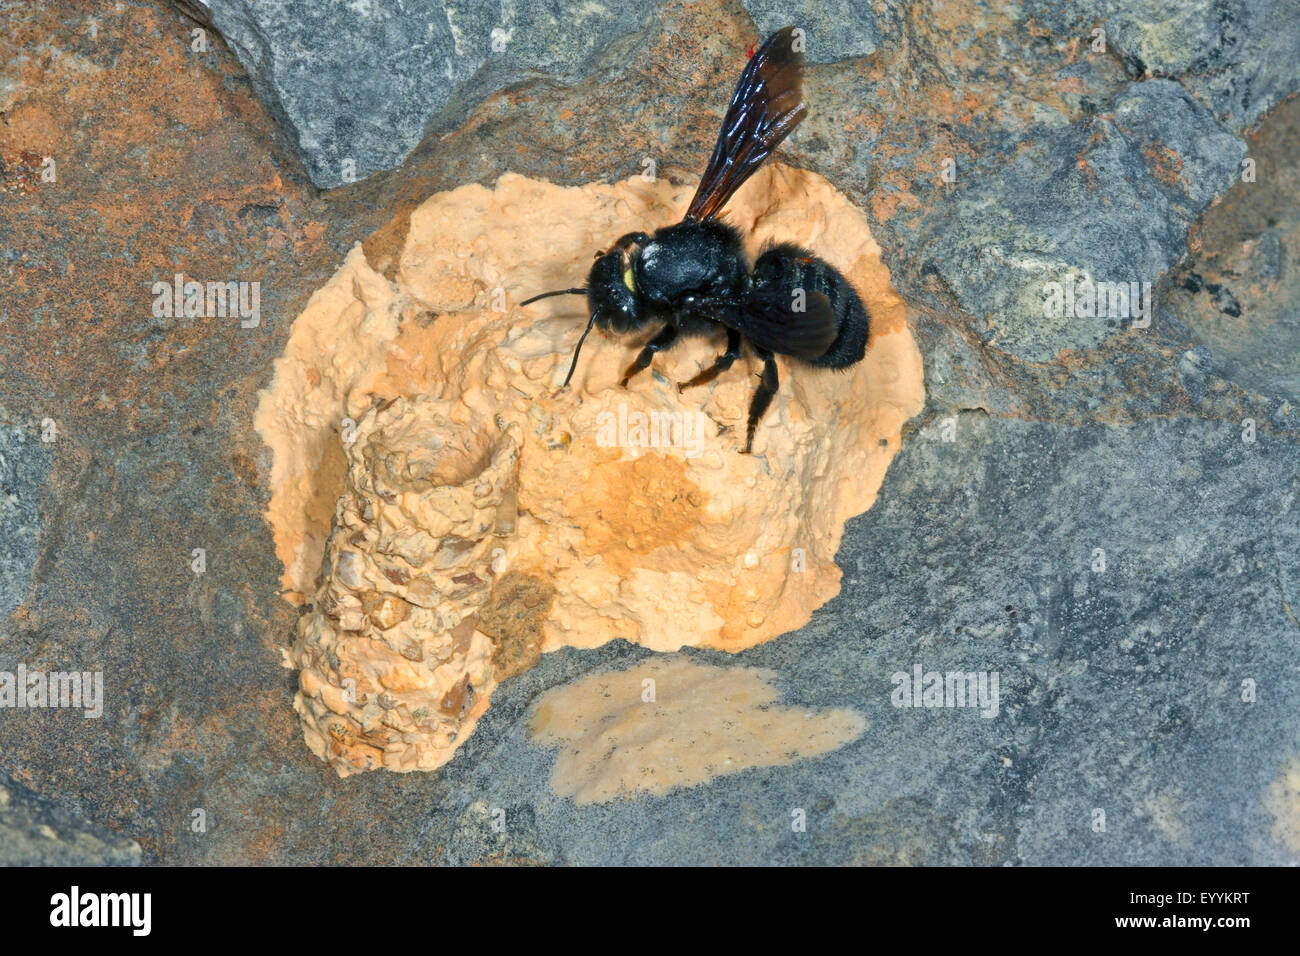 wall bee, mason bee (Megachile parietina, Chalicodoma parietina, Chalicodoma muraria), at its nest build from sand, clay and little stones, Germany Stock Photo